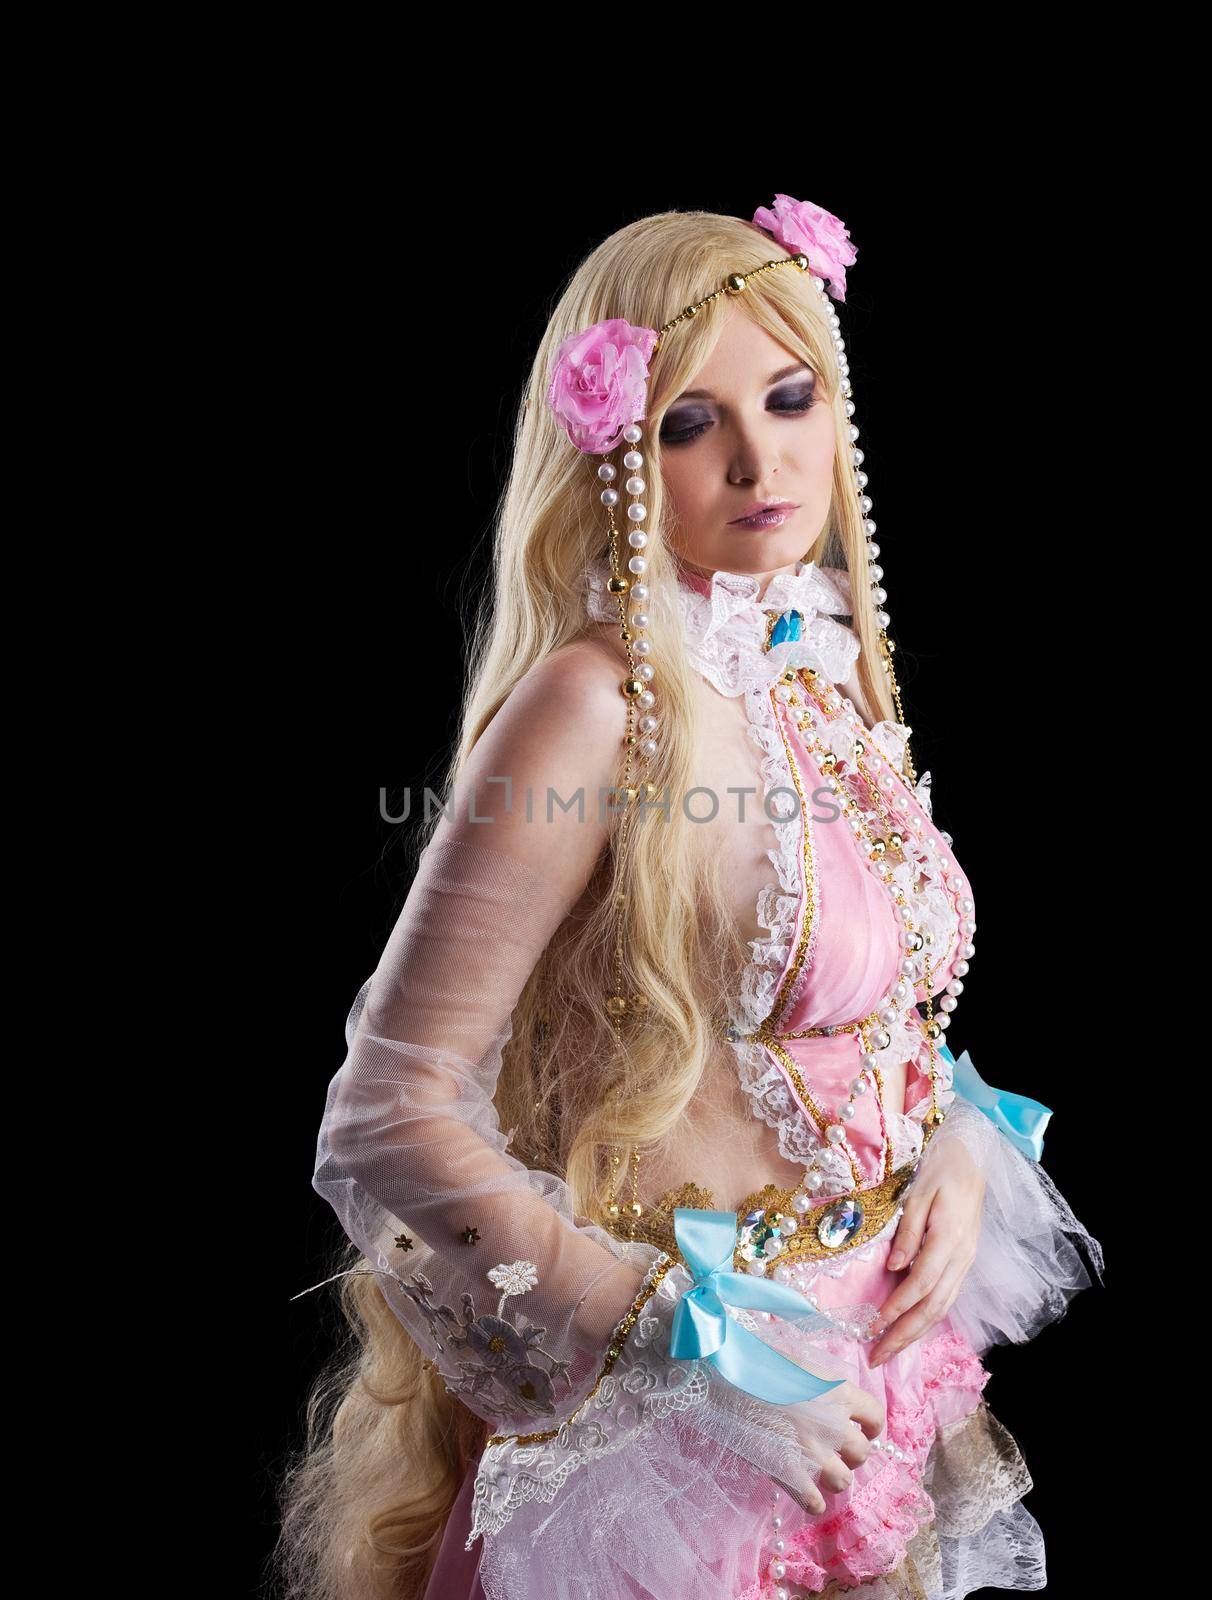 Young girl in fairy-tale doll cosplay costume portrait isolated